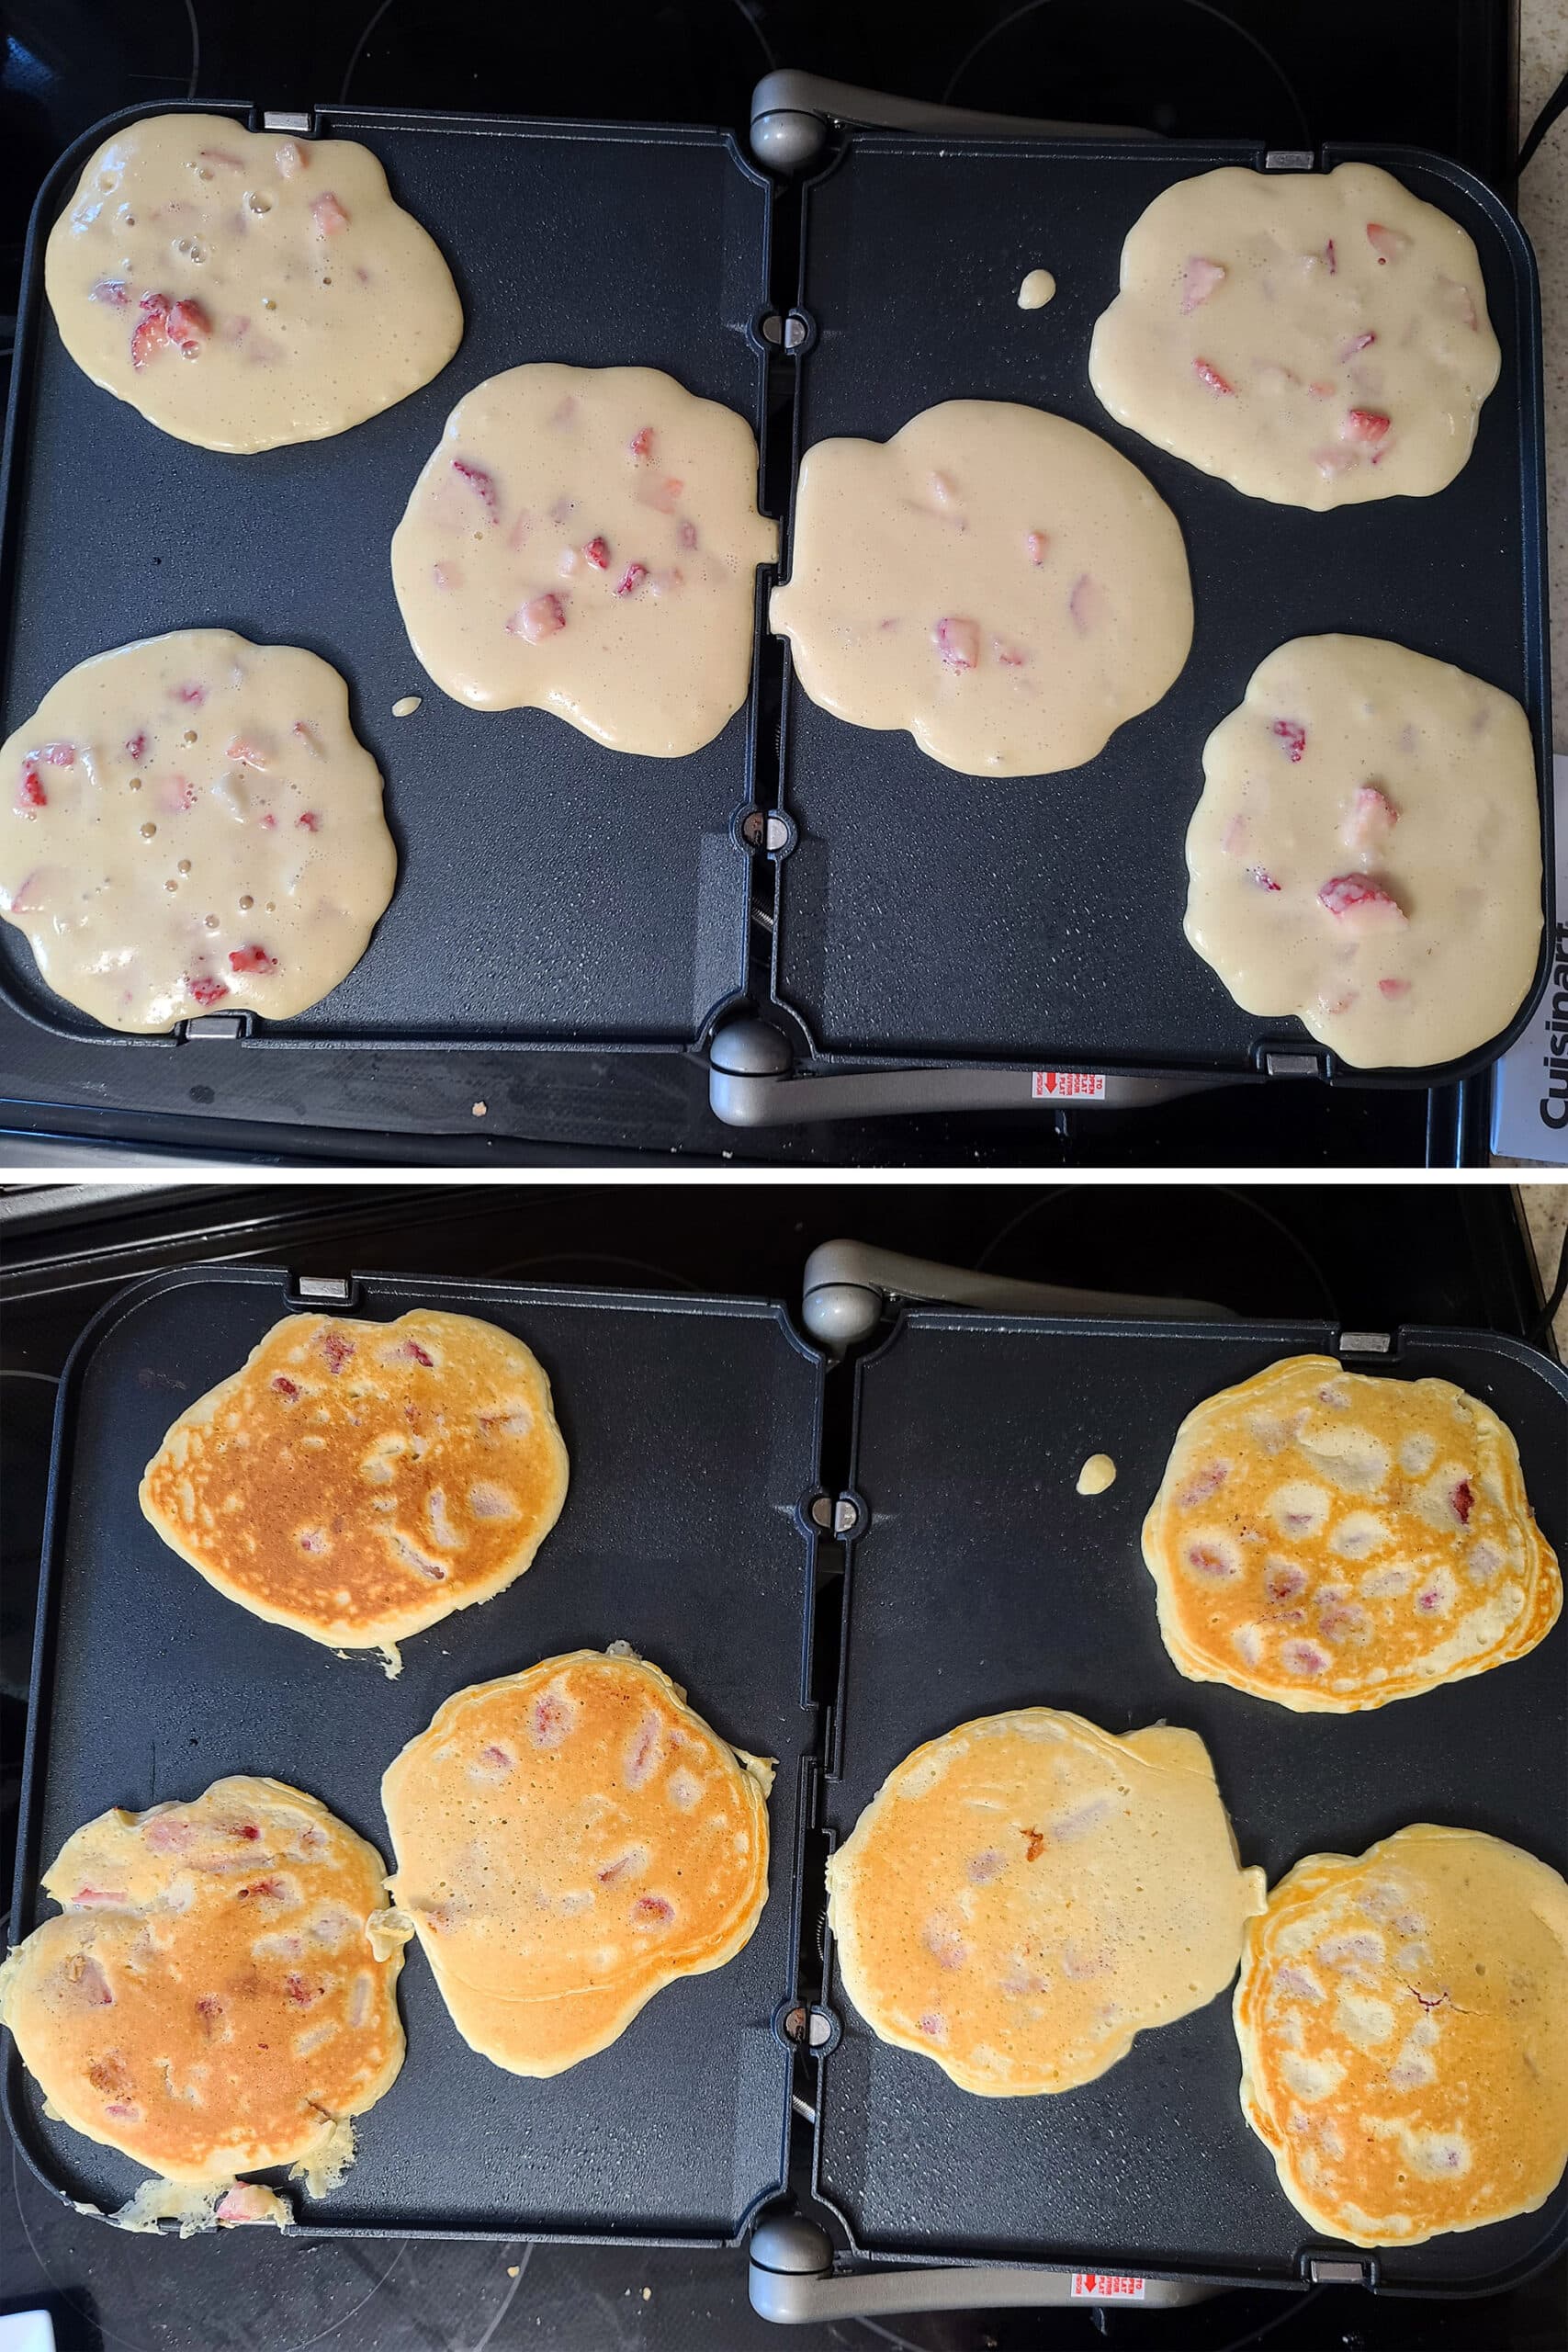 A 2 part image showing keto strawberry pancakes cooking on a griddle before and after the first flip.